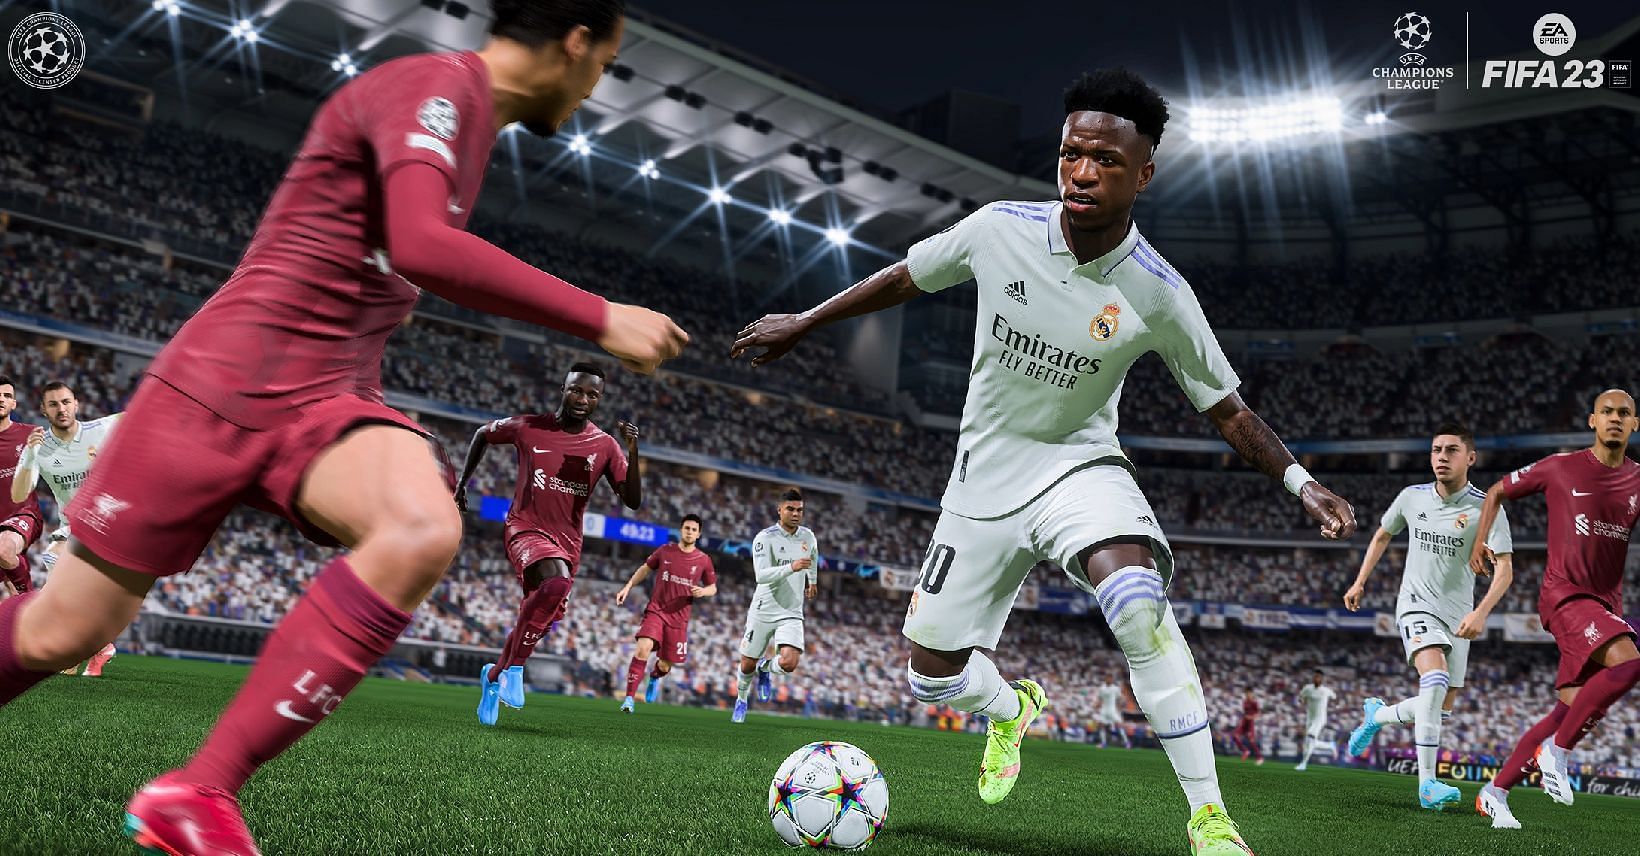 Real Madrid look to continue their dominance in the next season (Image via EA Sports)